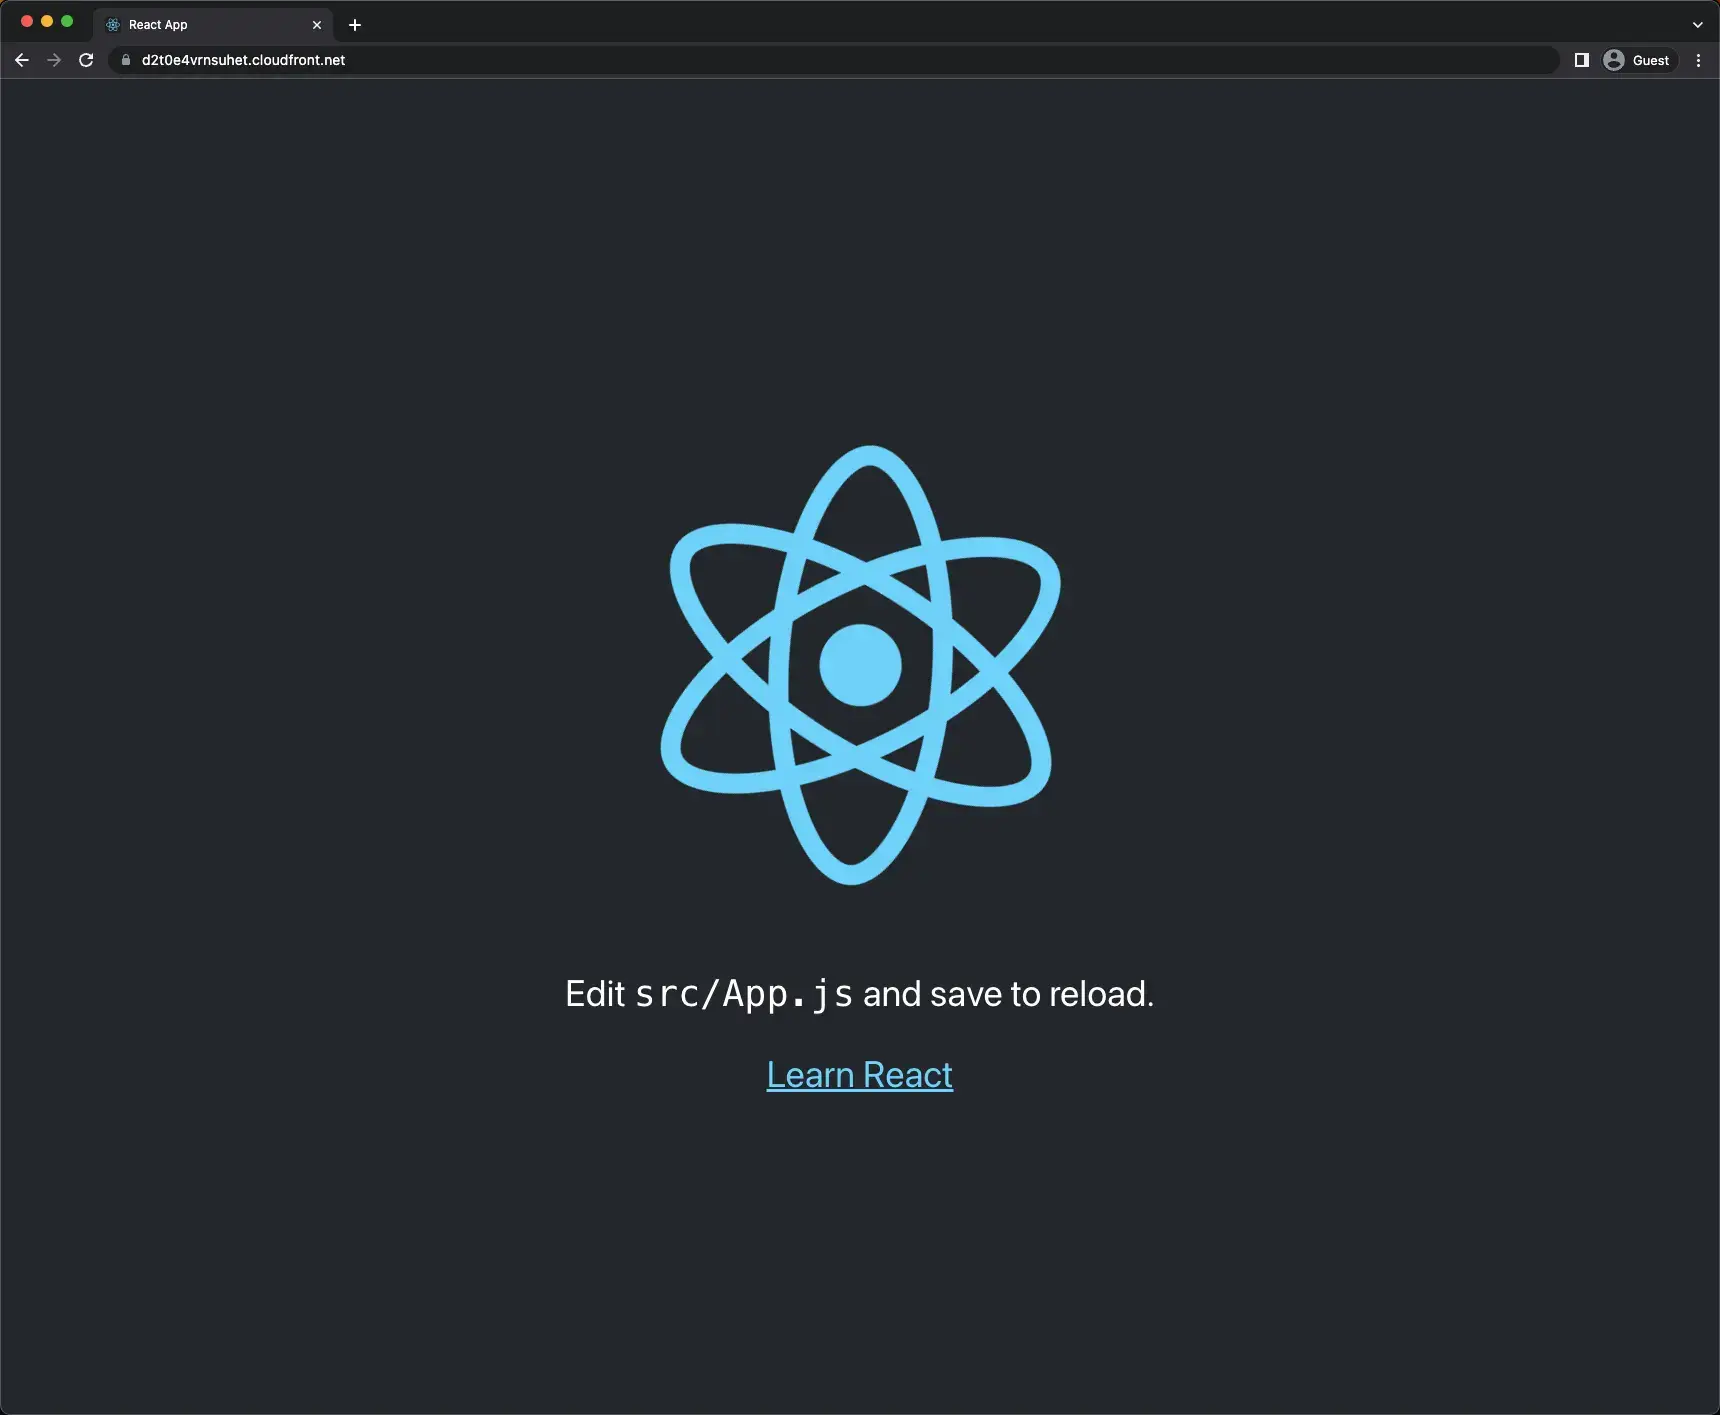 CloudFront React app example